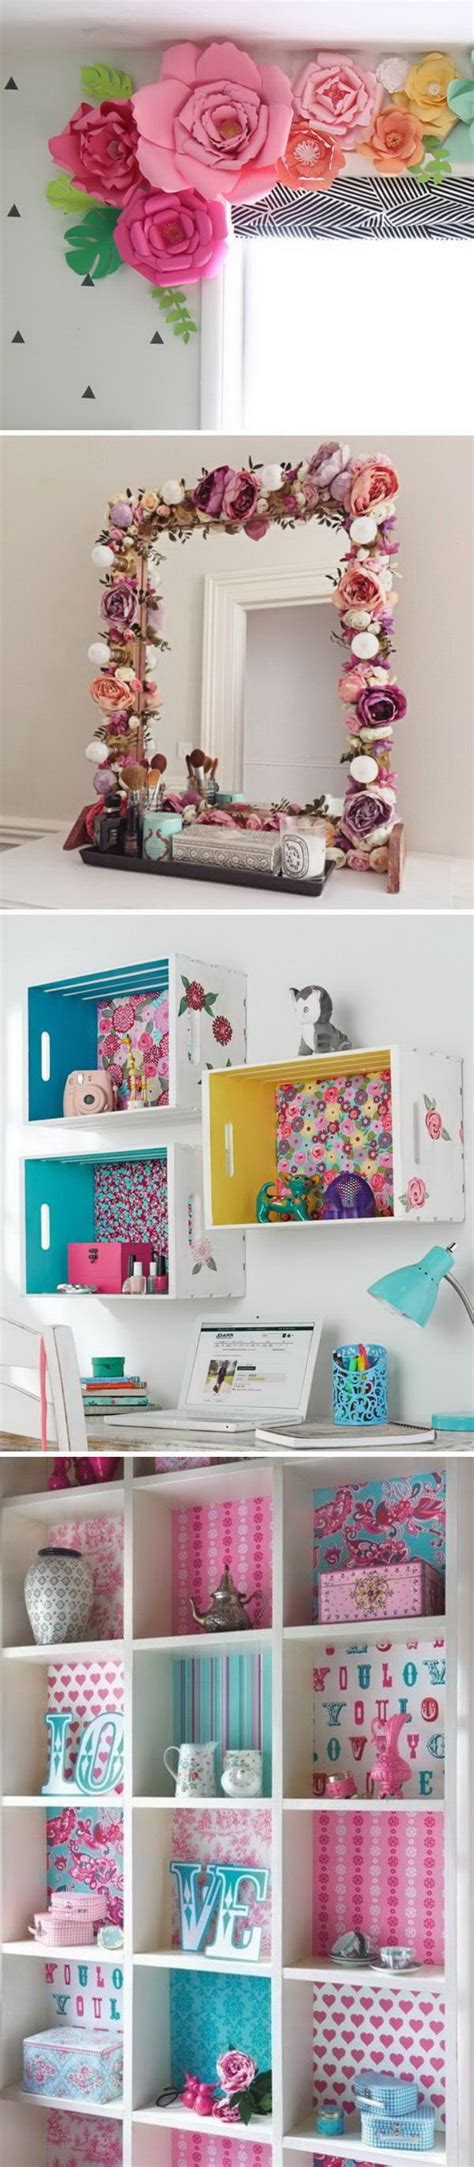 Girl Room DIY Projects